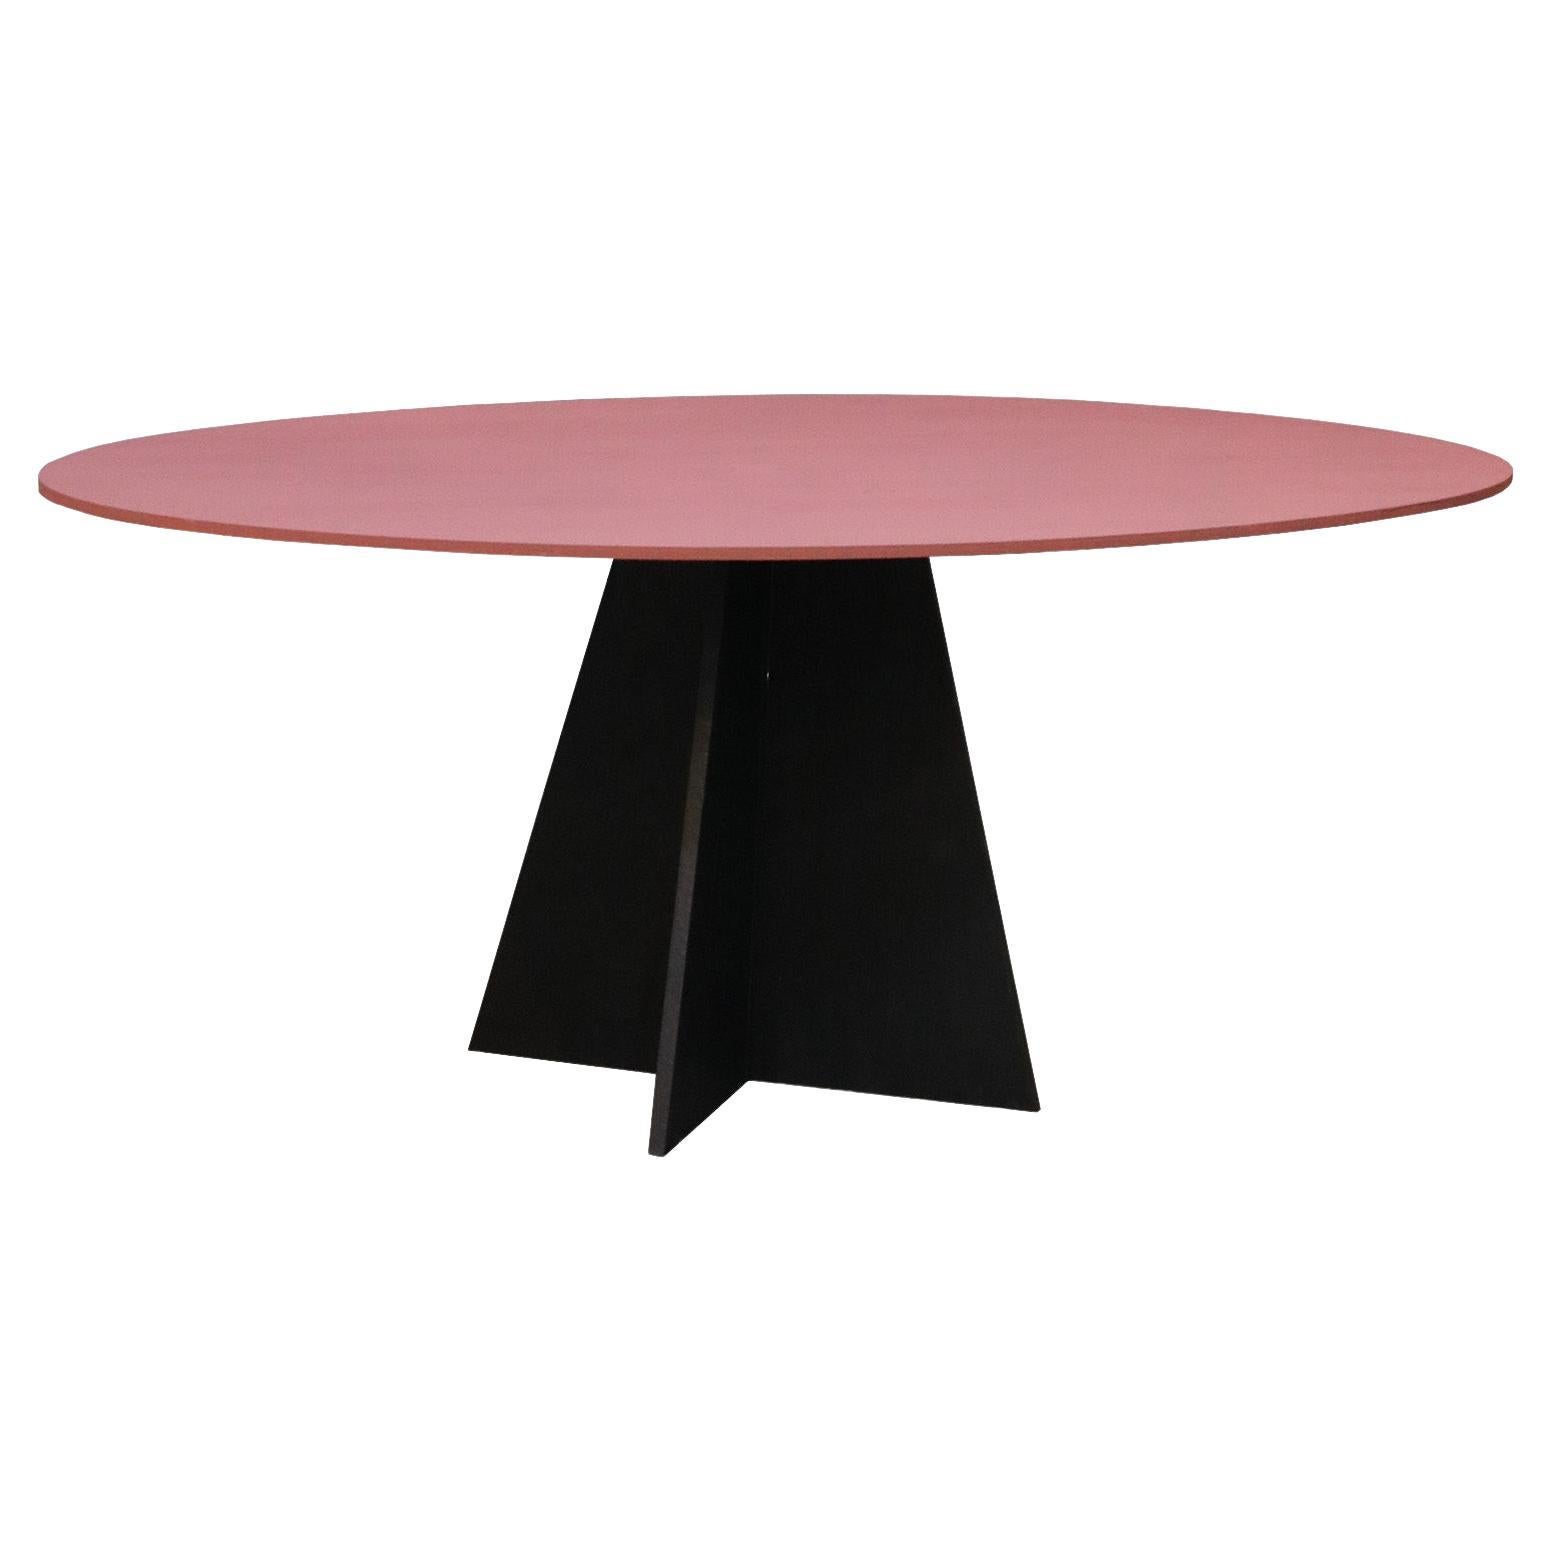 Aether Oval Dining Table With Pedestal Base For Sale